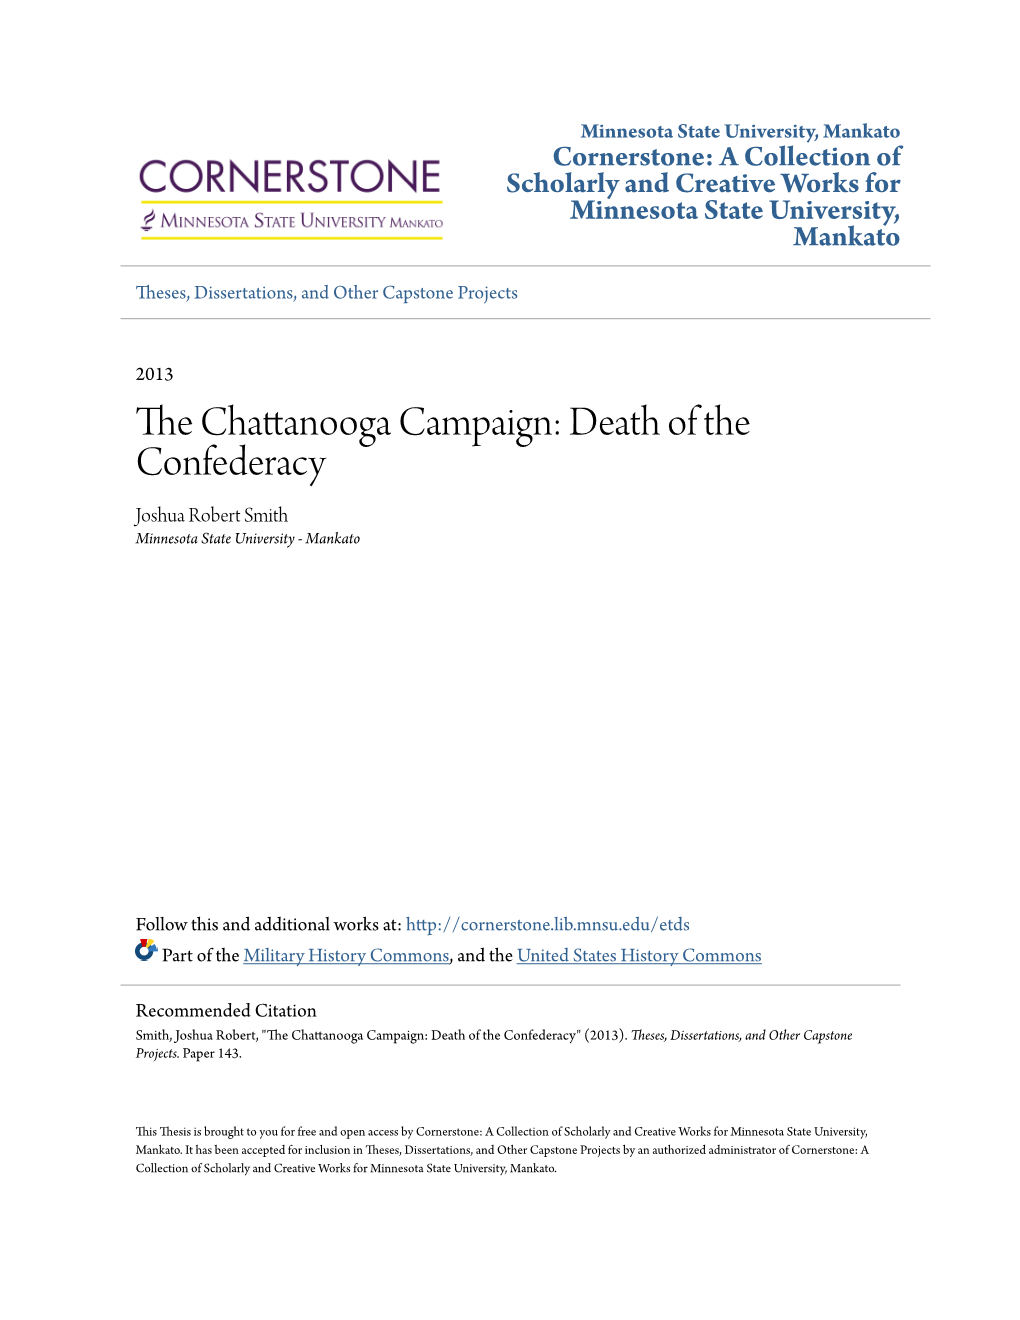 The Chattanooga Campaign: Death of the Confederacy